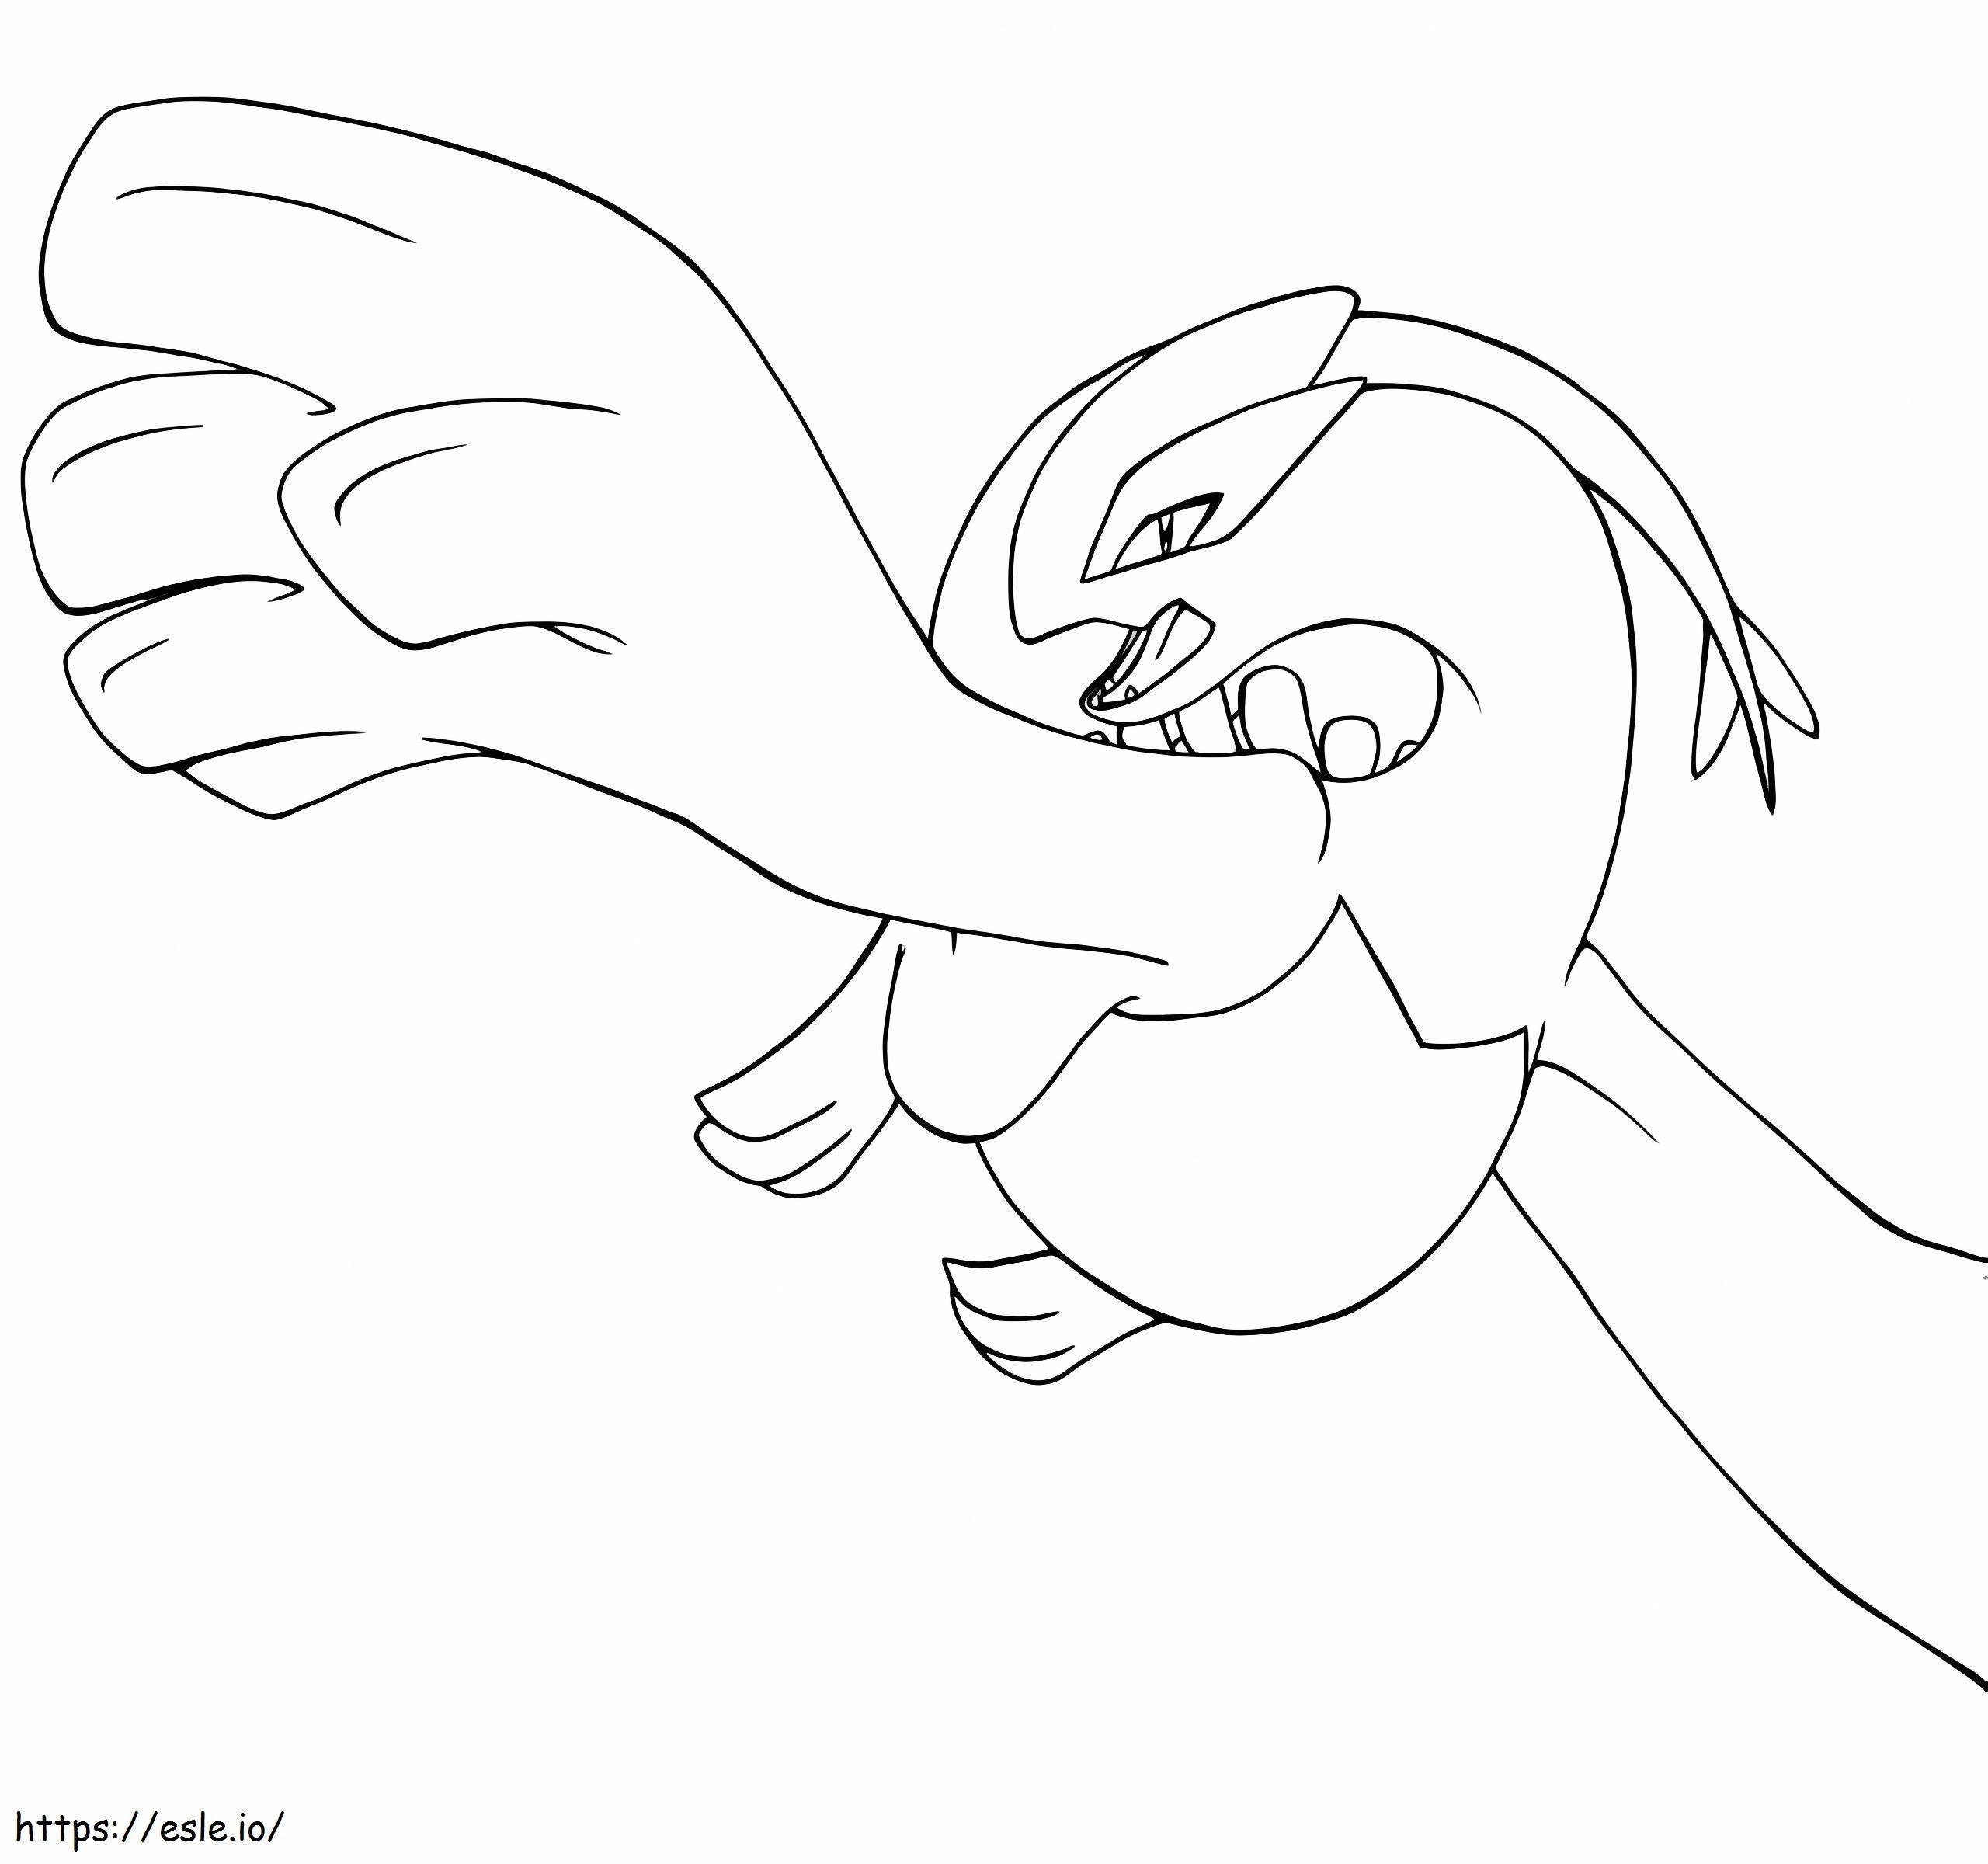 Lugia 1 coloring page